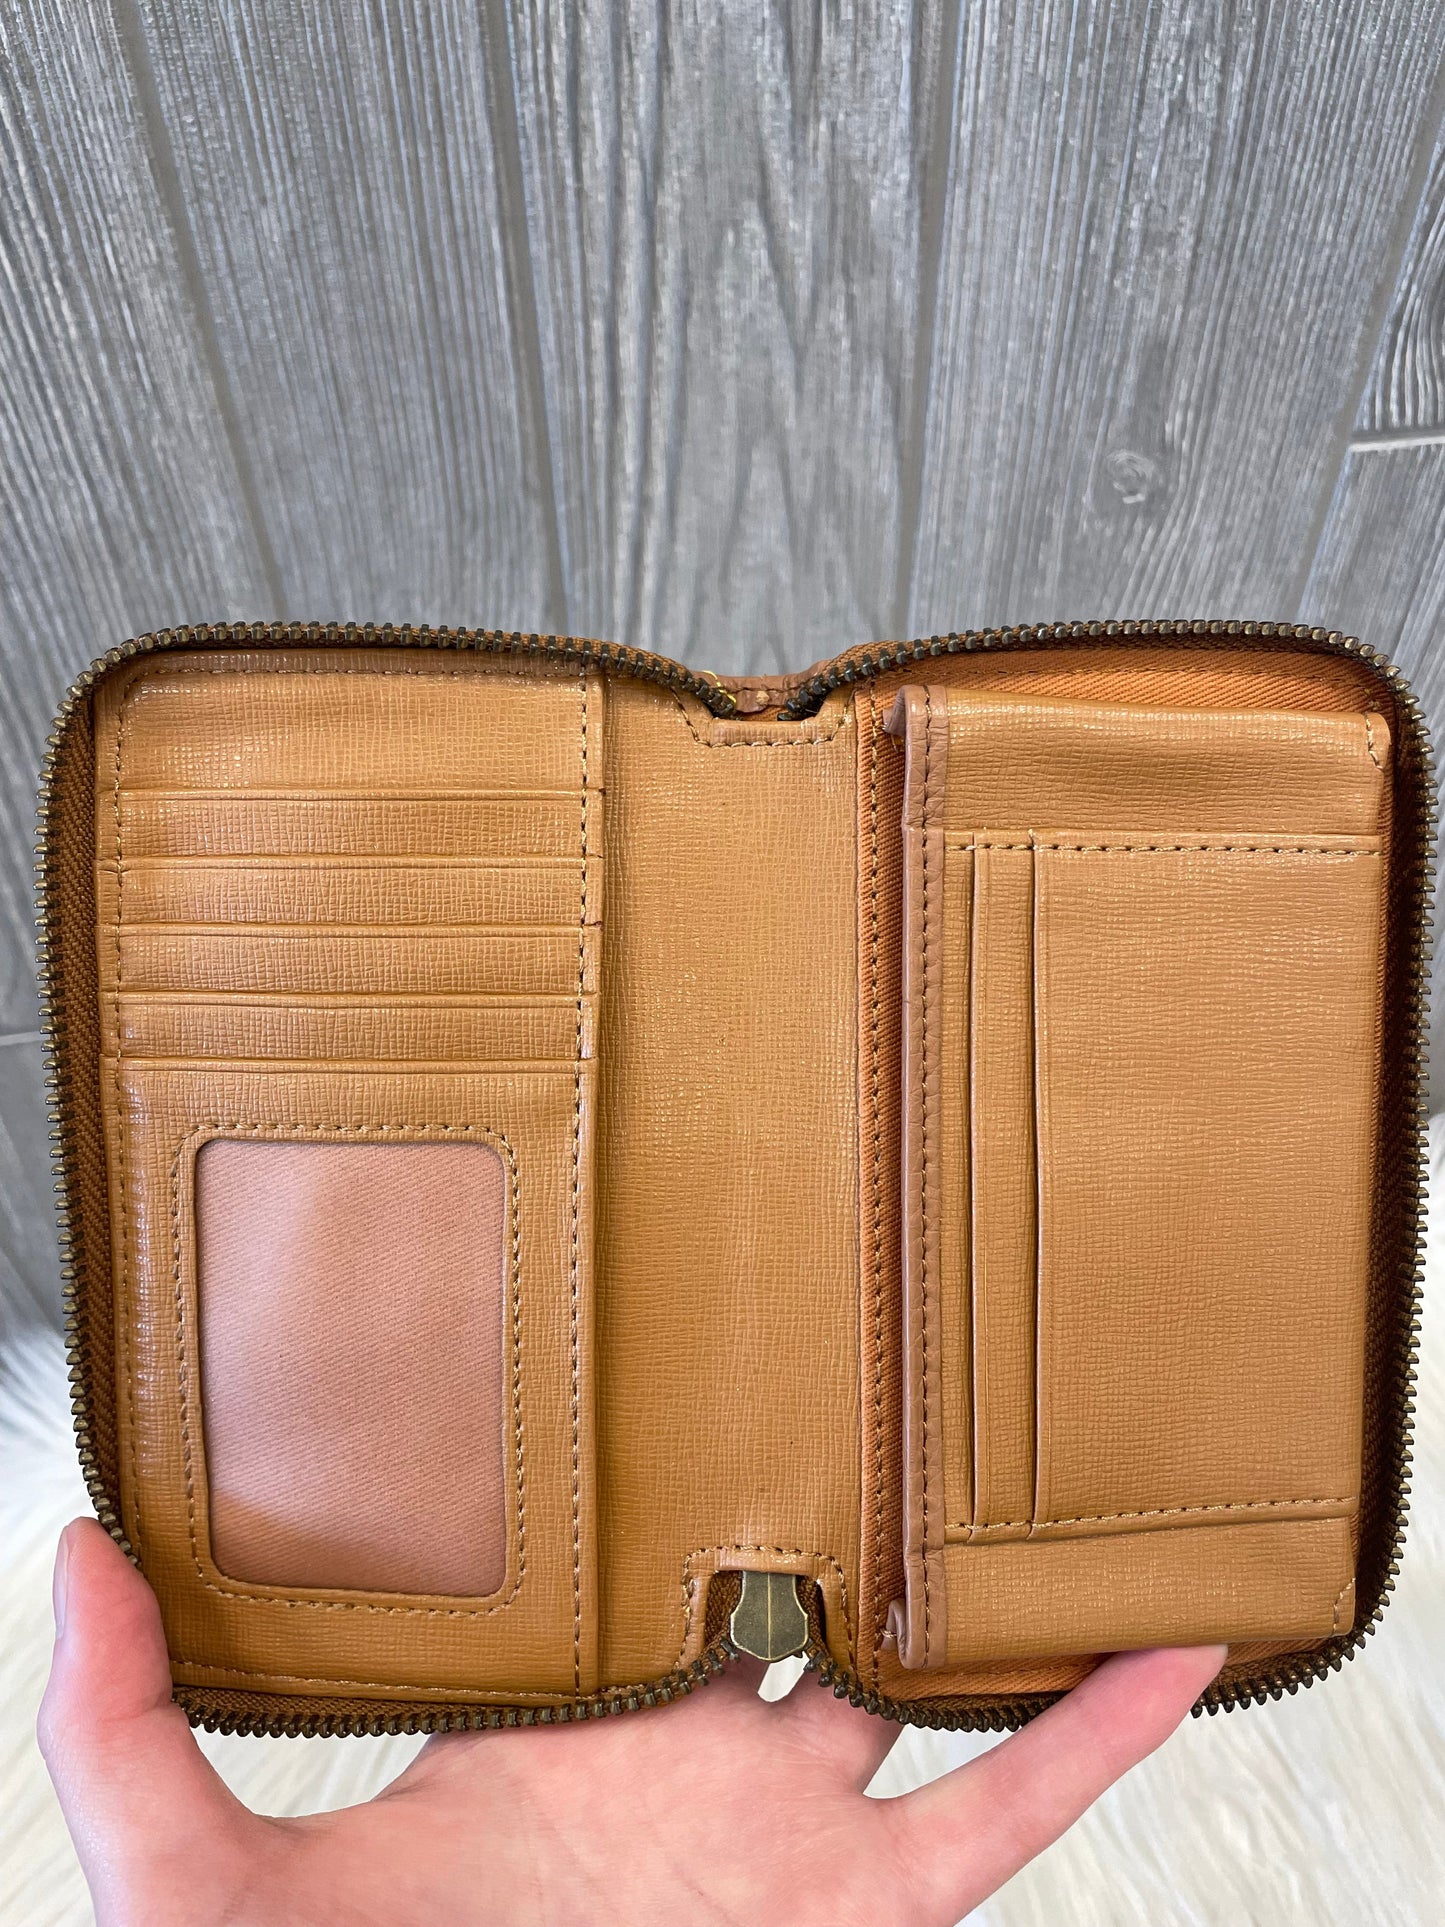 Wallet Leather By Clothes Mentor  Size: Medium